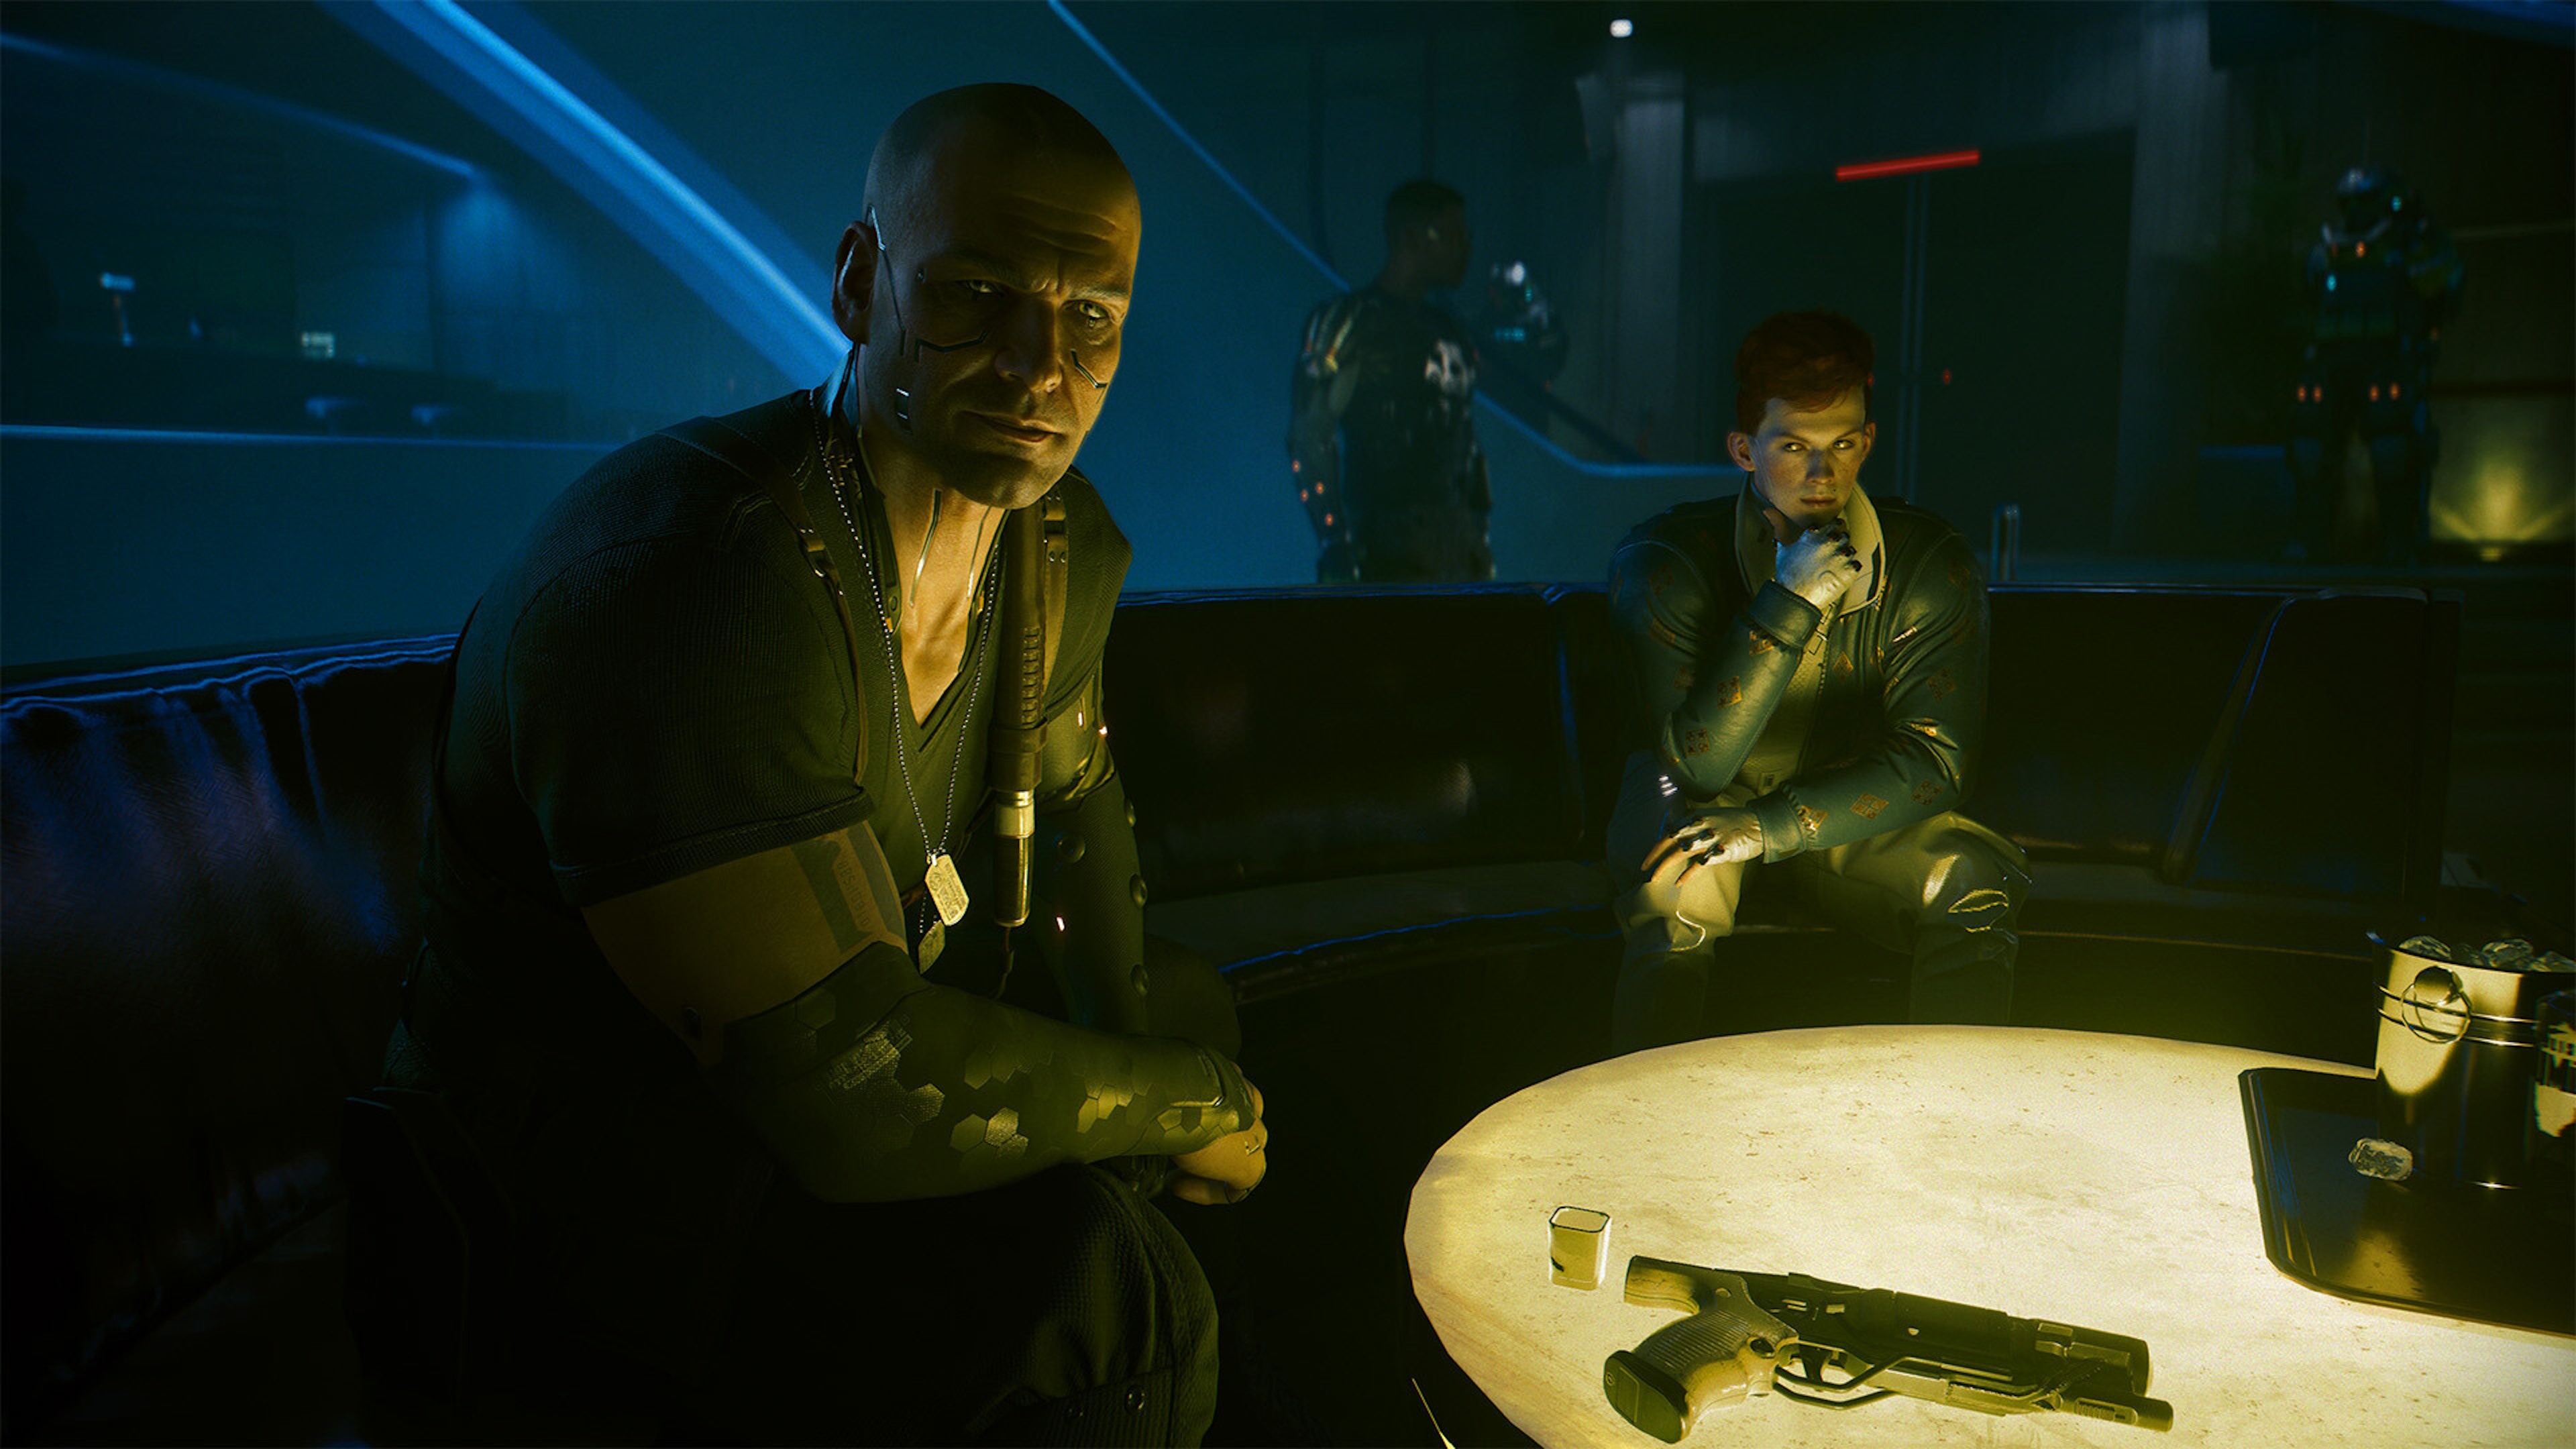  Here's what's free in Cyberpunk 2077's 2.0 update (car chases, yay), and what requires the $30 Phantom Liberty expansion 